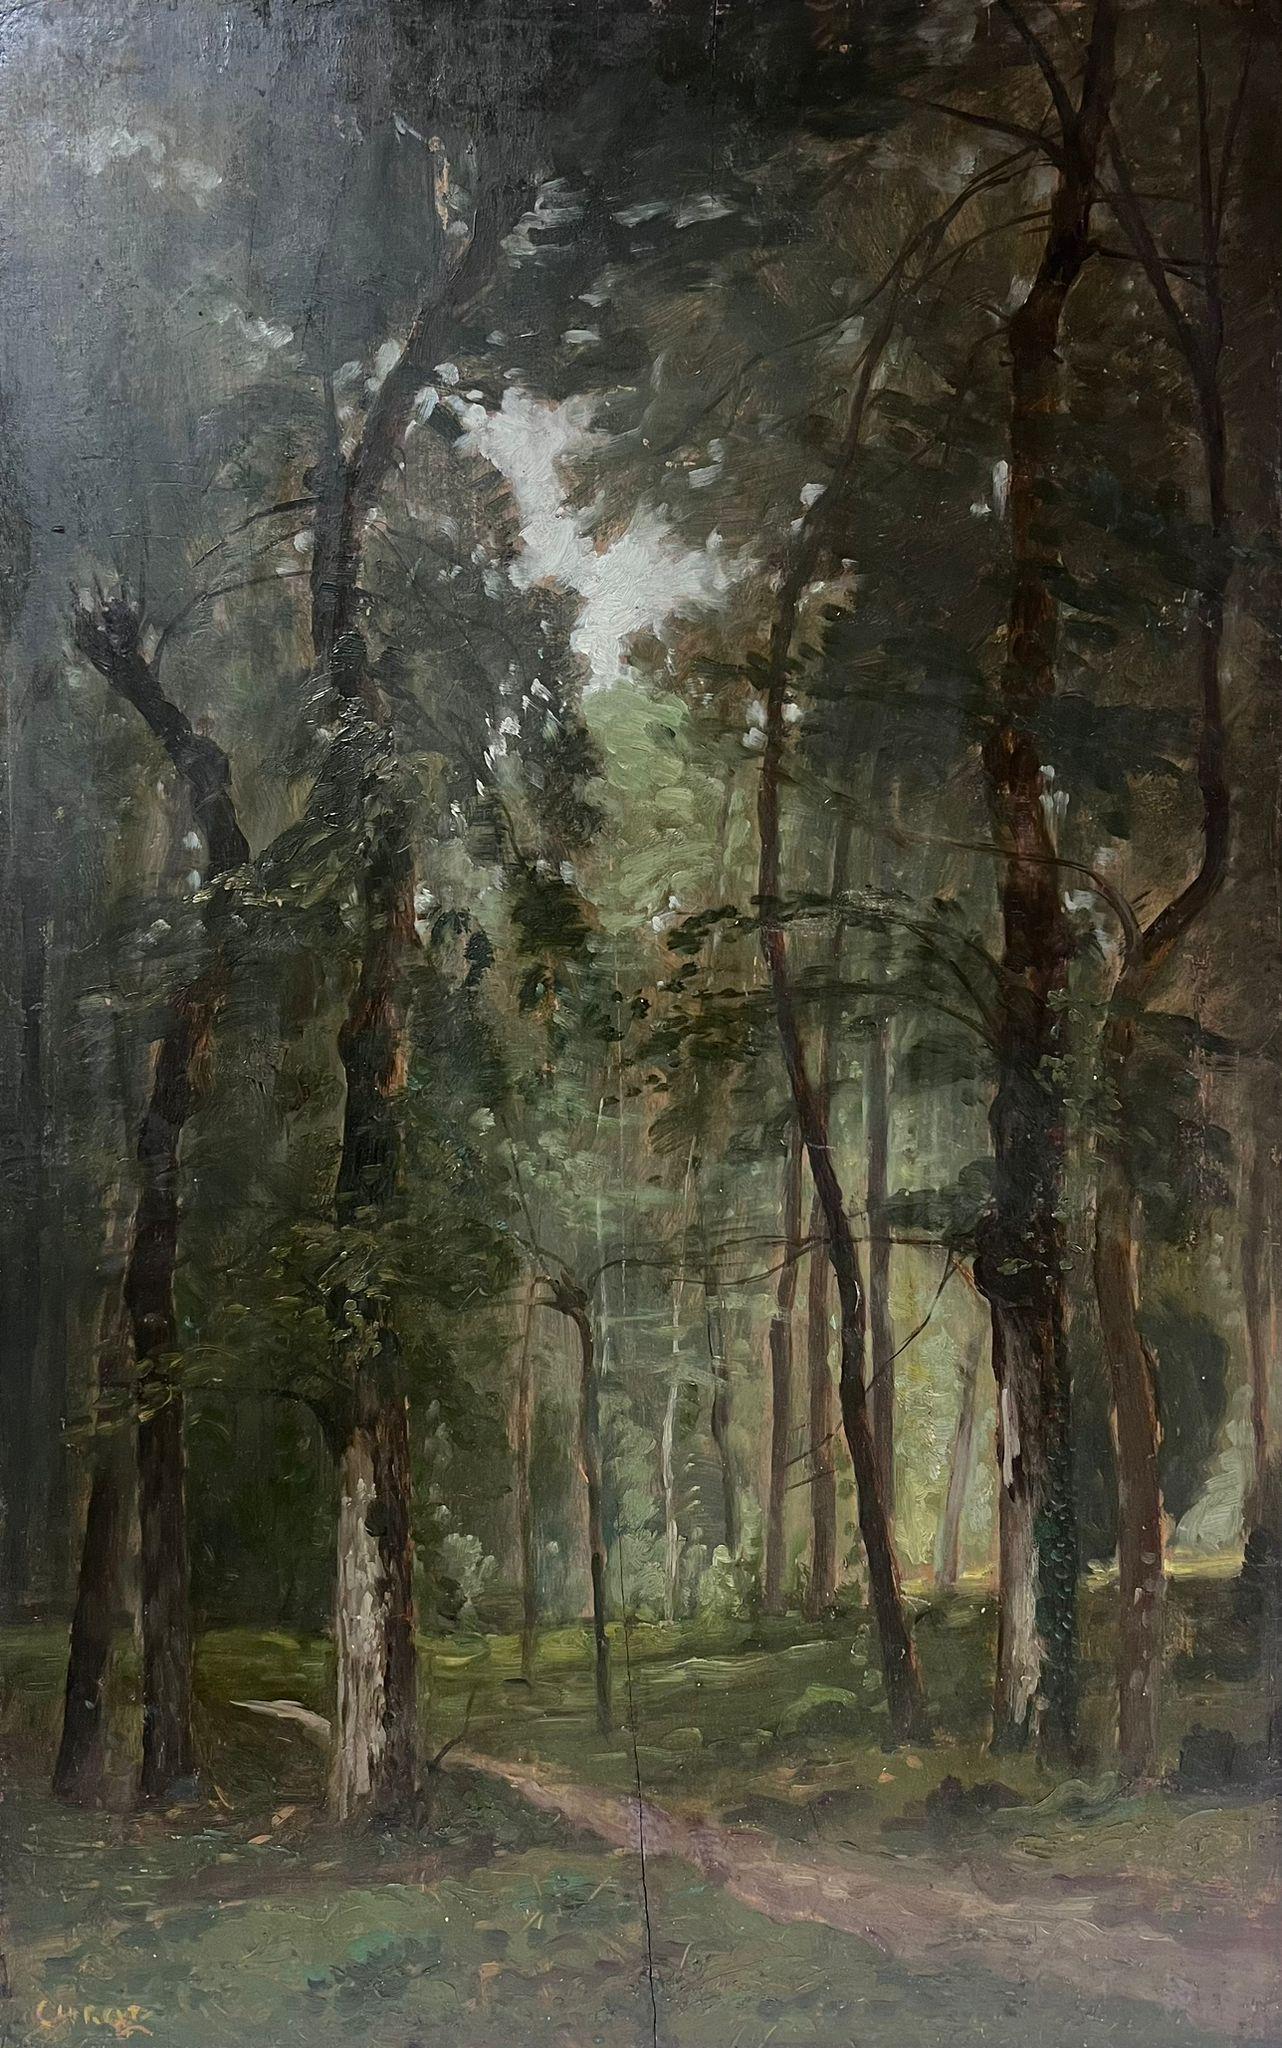 The Barbizon Forest
circle of Jean-Baptiste Camille Corot (French 19th century
bears signature,
oil on wood panel (cradled), unframed
panel: 30 x 19 inches
provenance: private collection, France
condition: very good and sound condition 